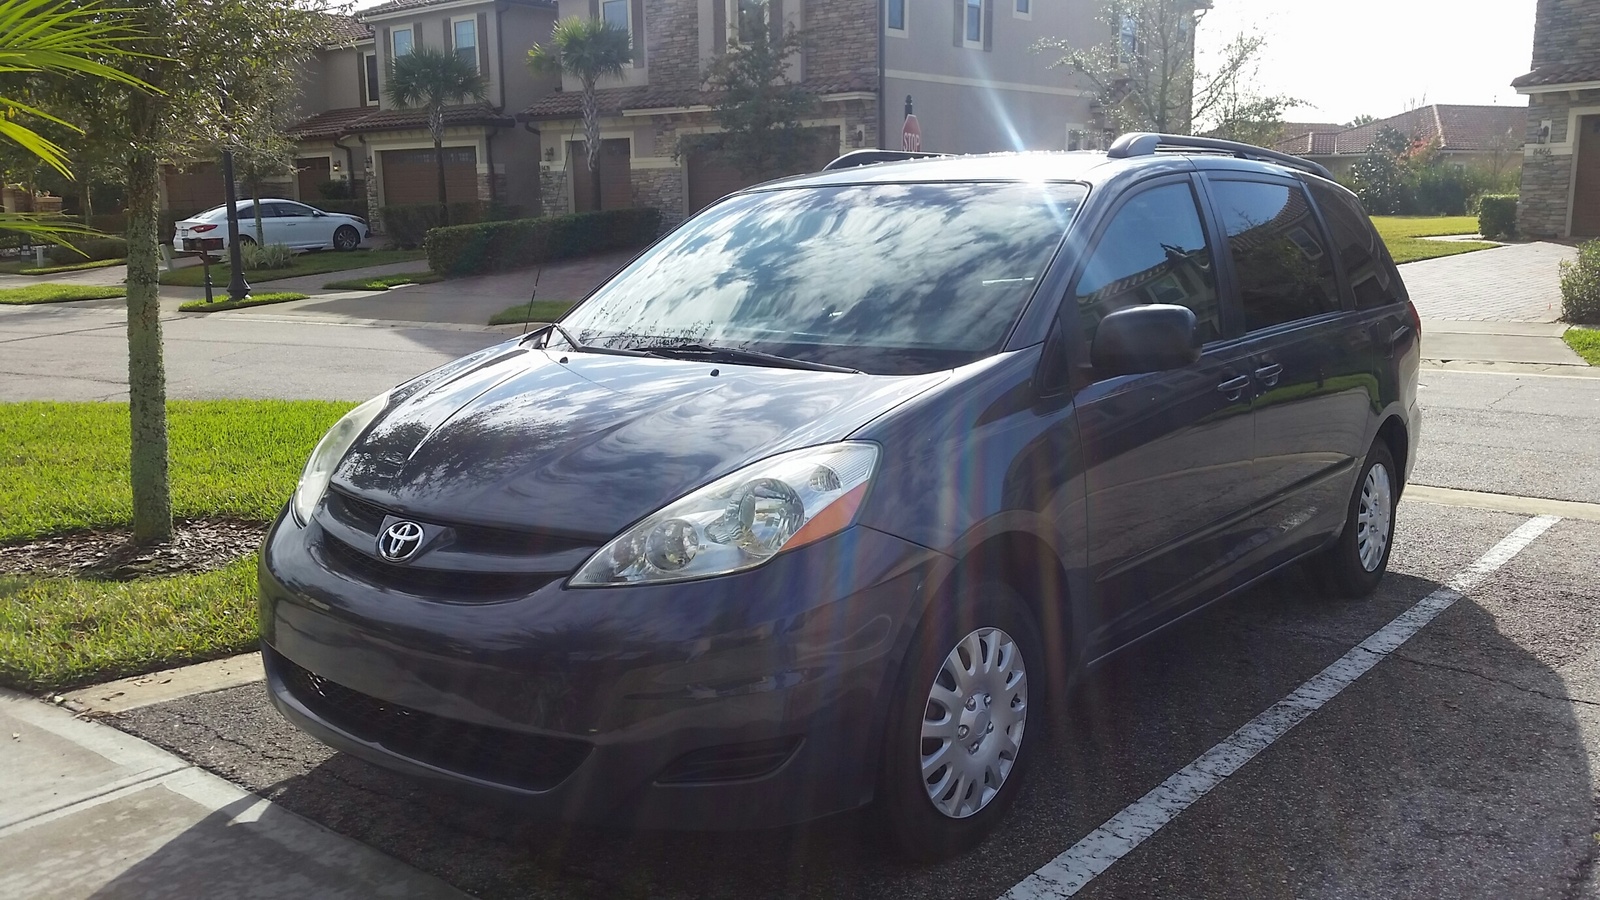 Any problems with 2006 toyota sienna